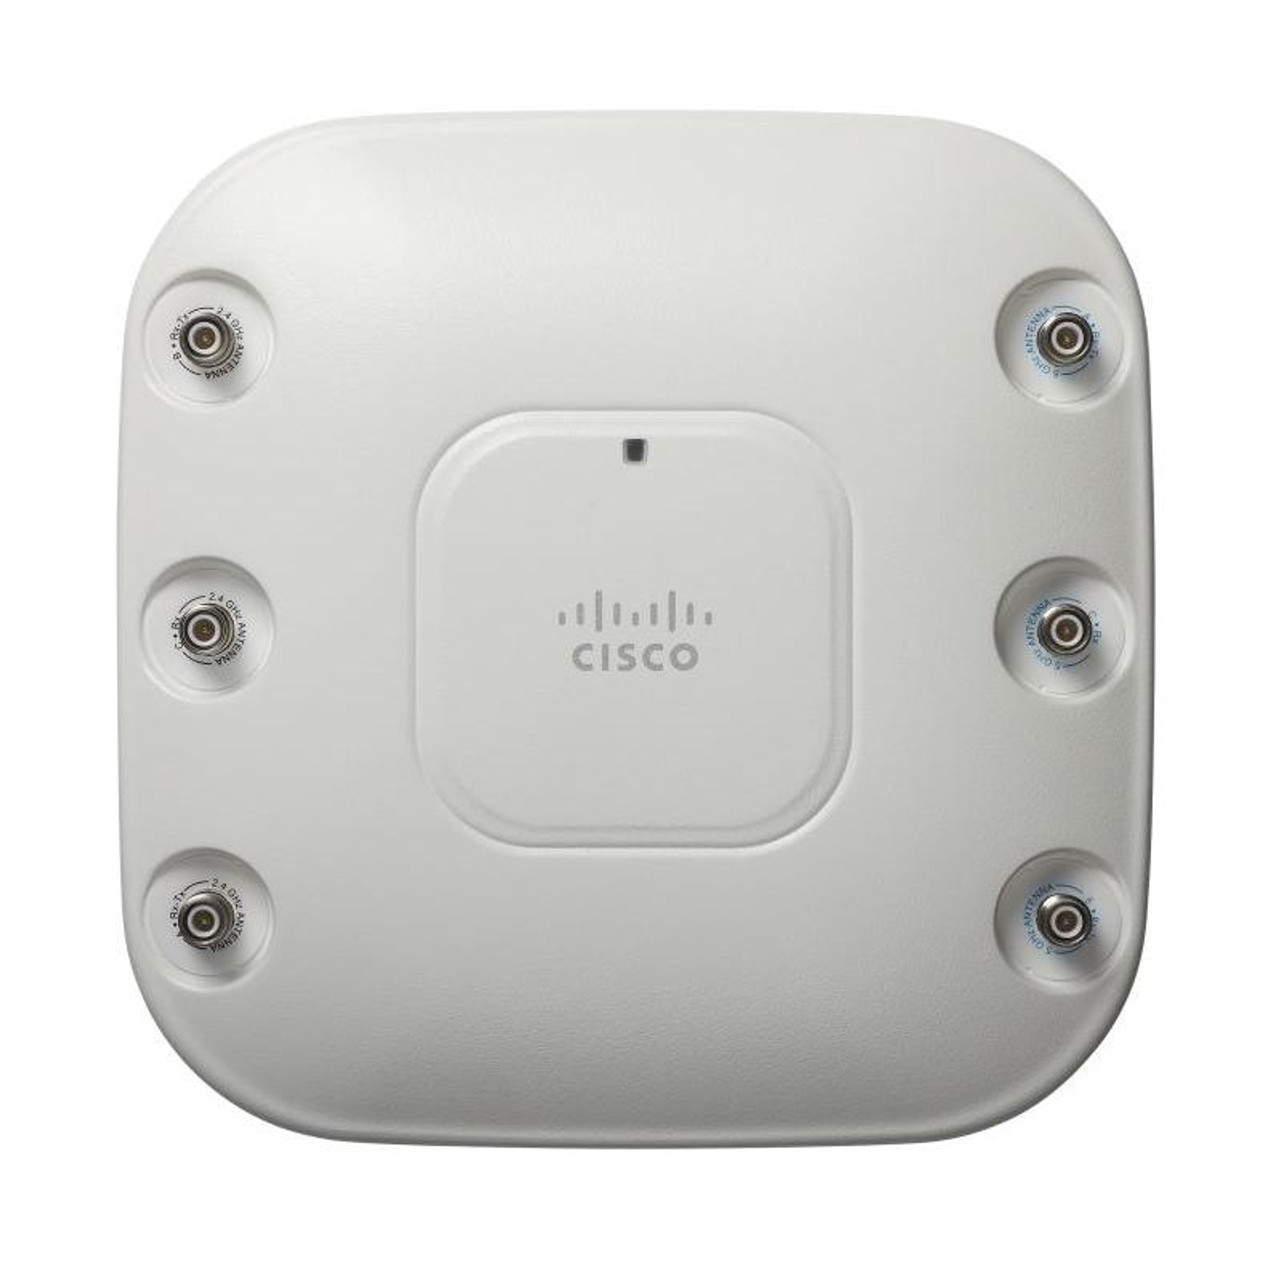 CISCO AIRONET 1260 SERIES ACCESS POINT (STANDALONE) - RADIO ACCESS POINT